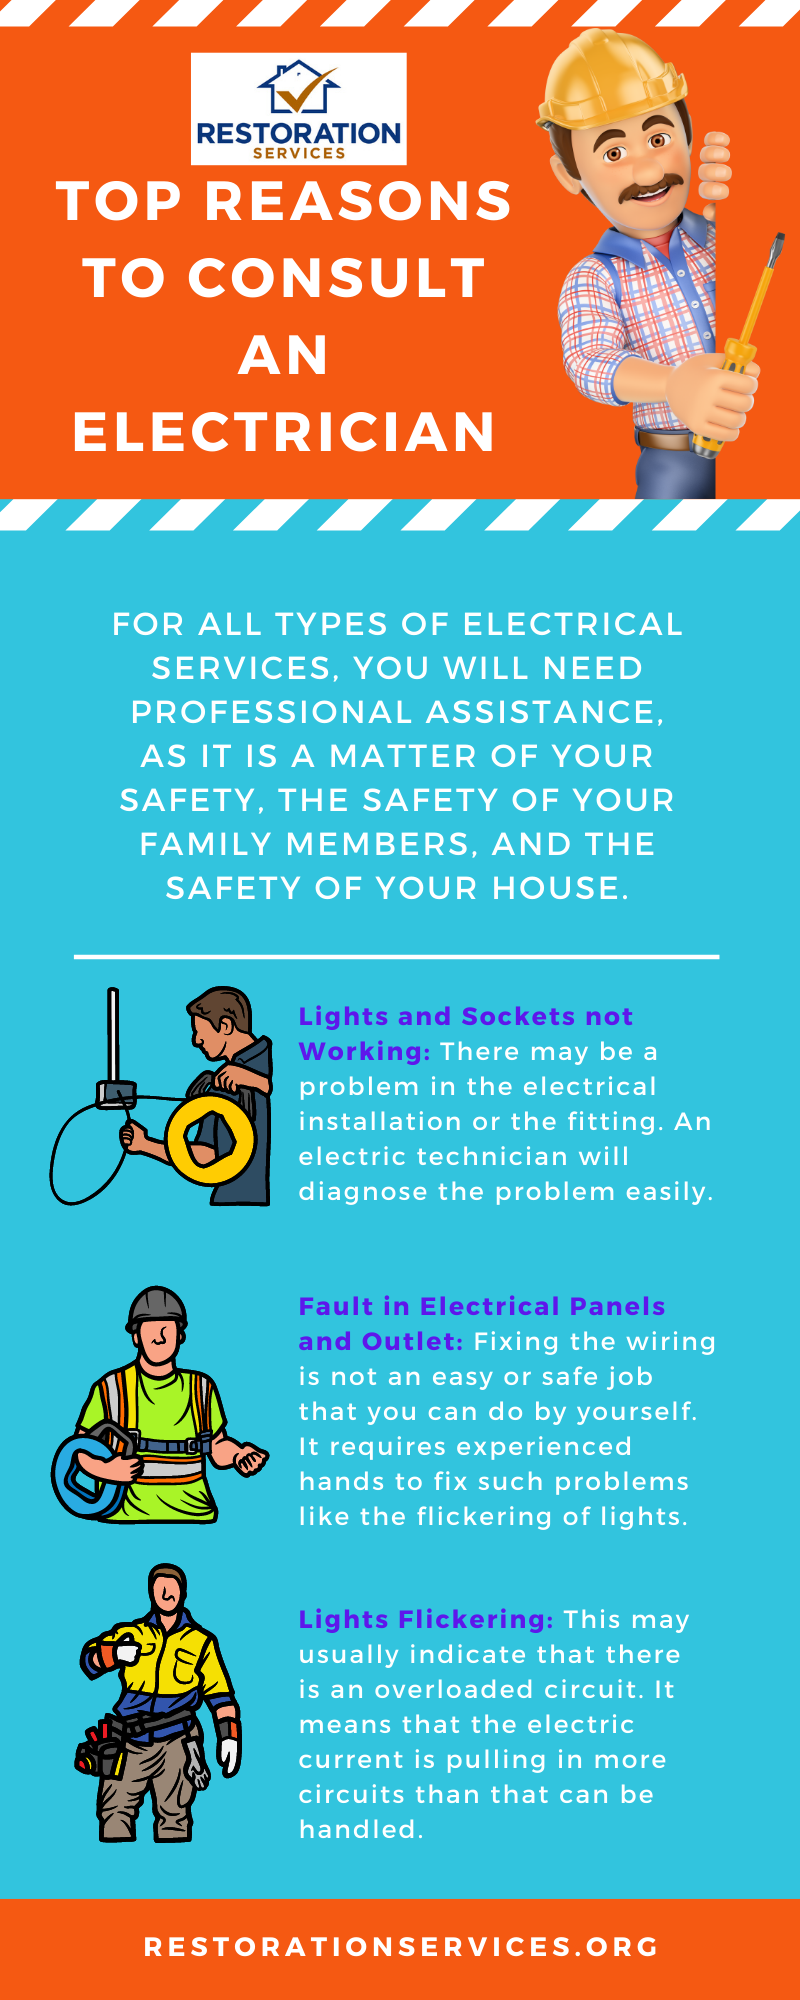 Top Reasons to Consult an Electrician